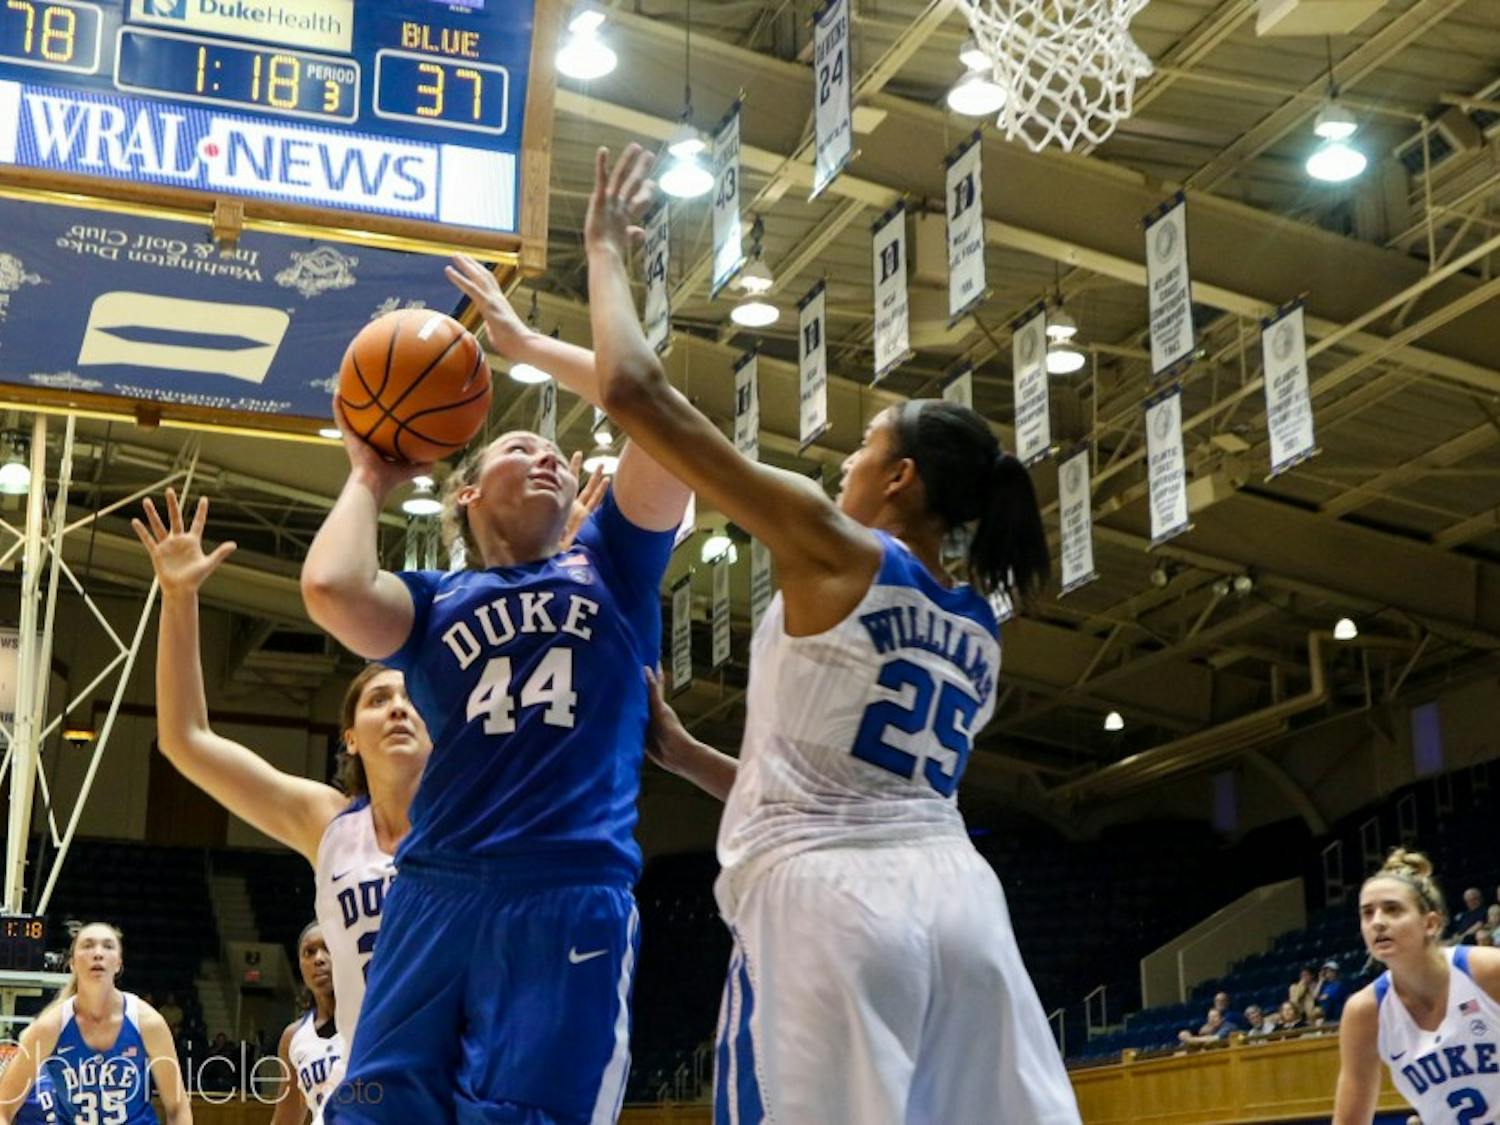 Madison Treece gives Duke depth in the frontcourt as it looks to replace Oderah Chidom and Kendall Cooper.